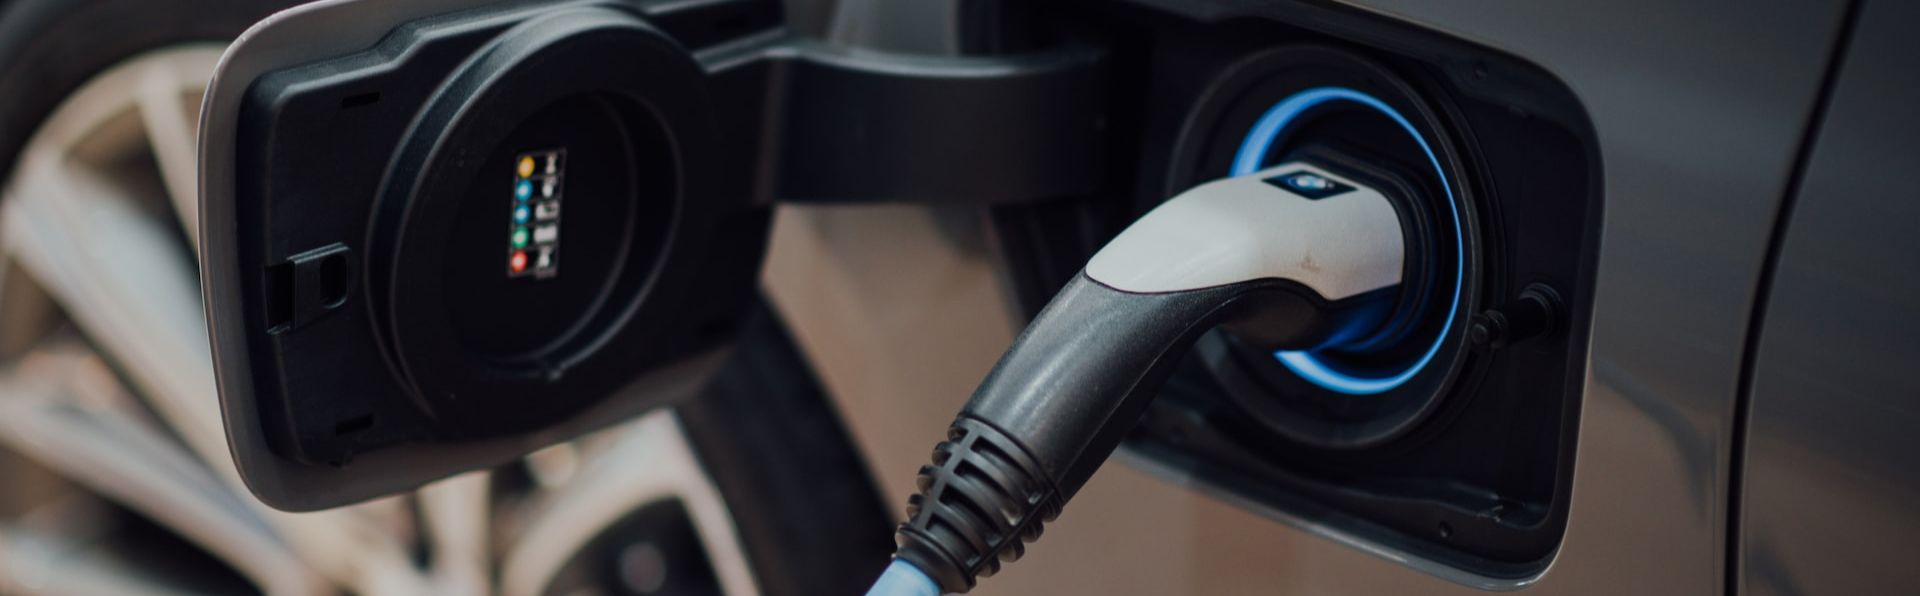 How to Charge Your Electric Vehicle at Home